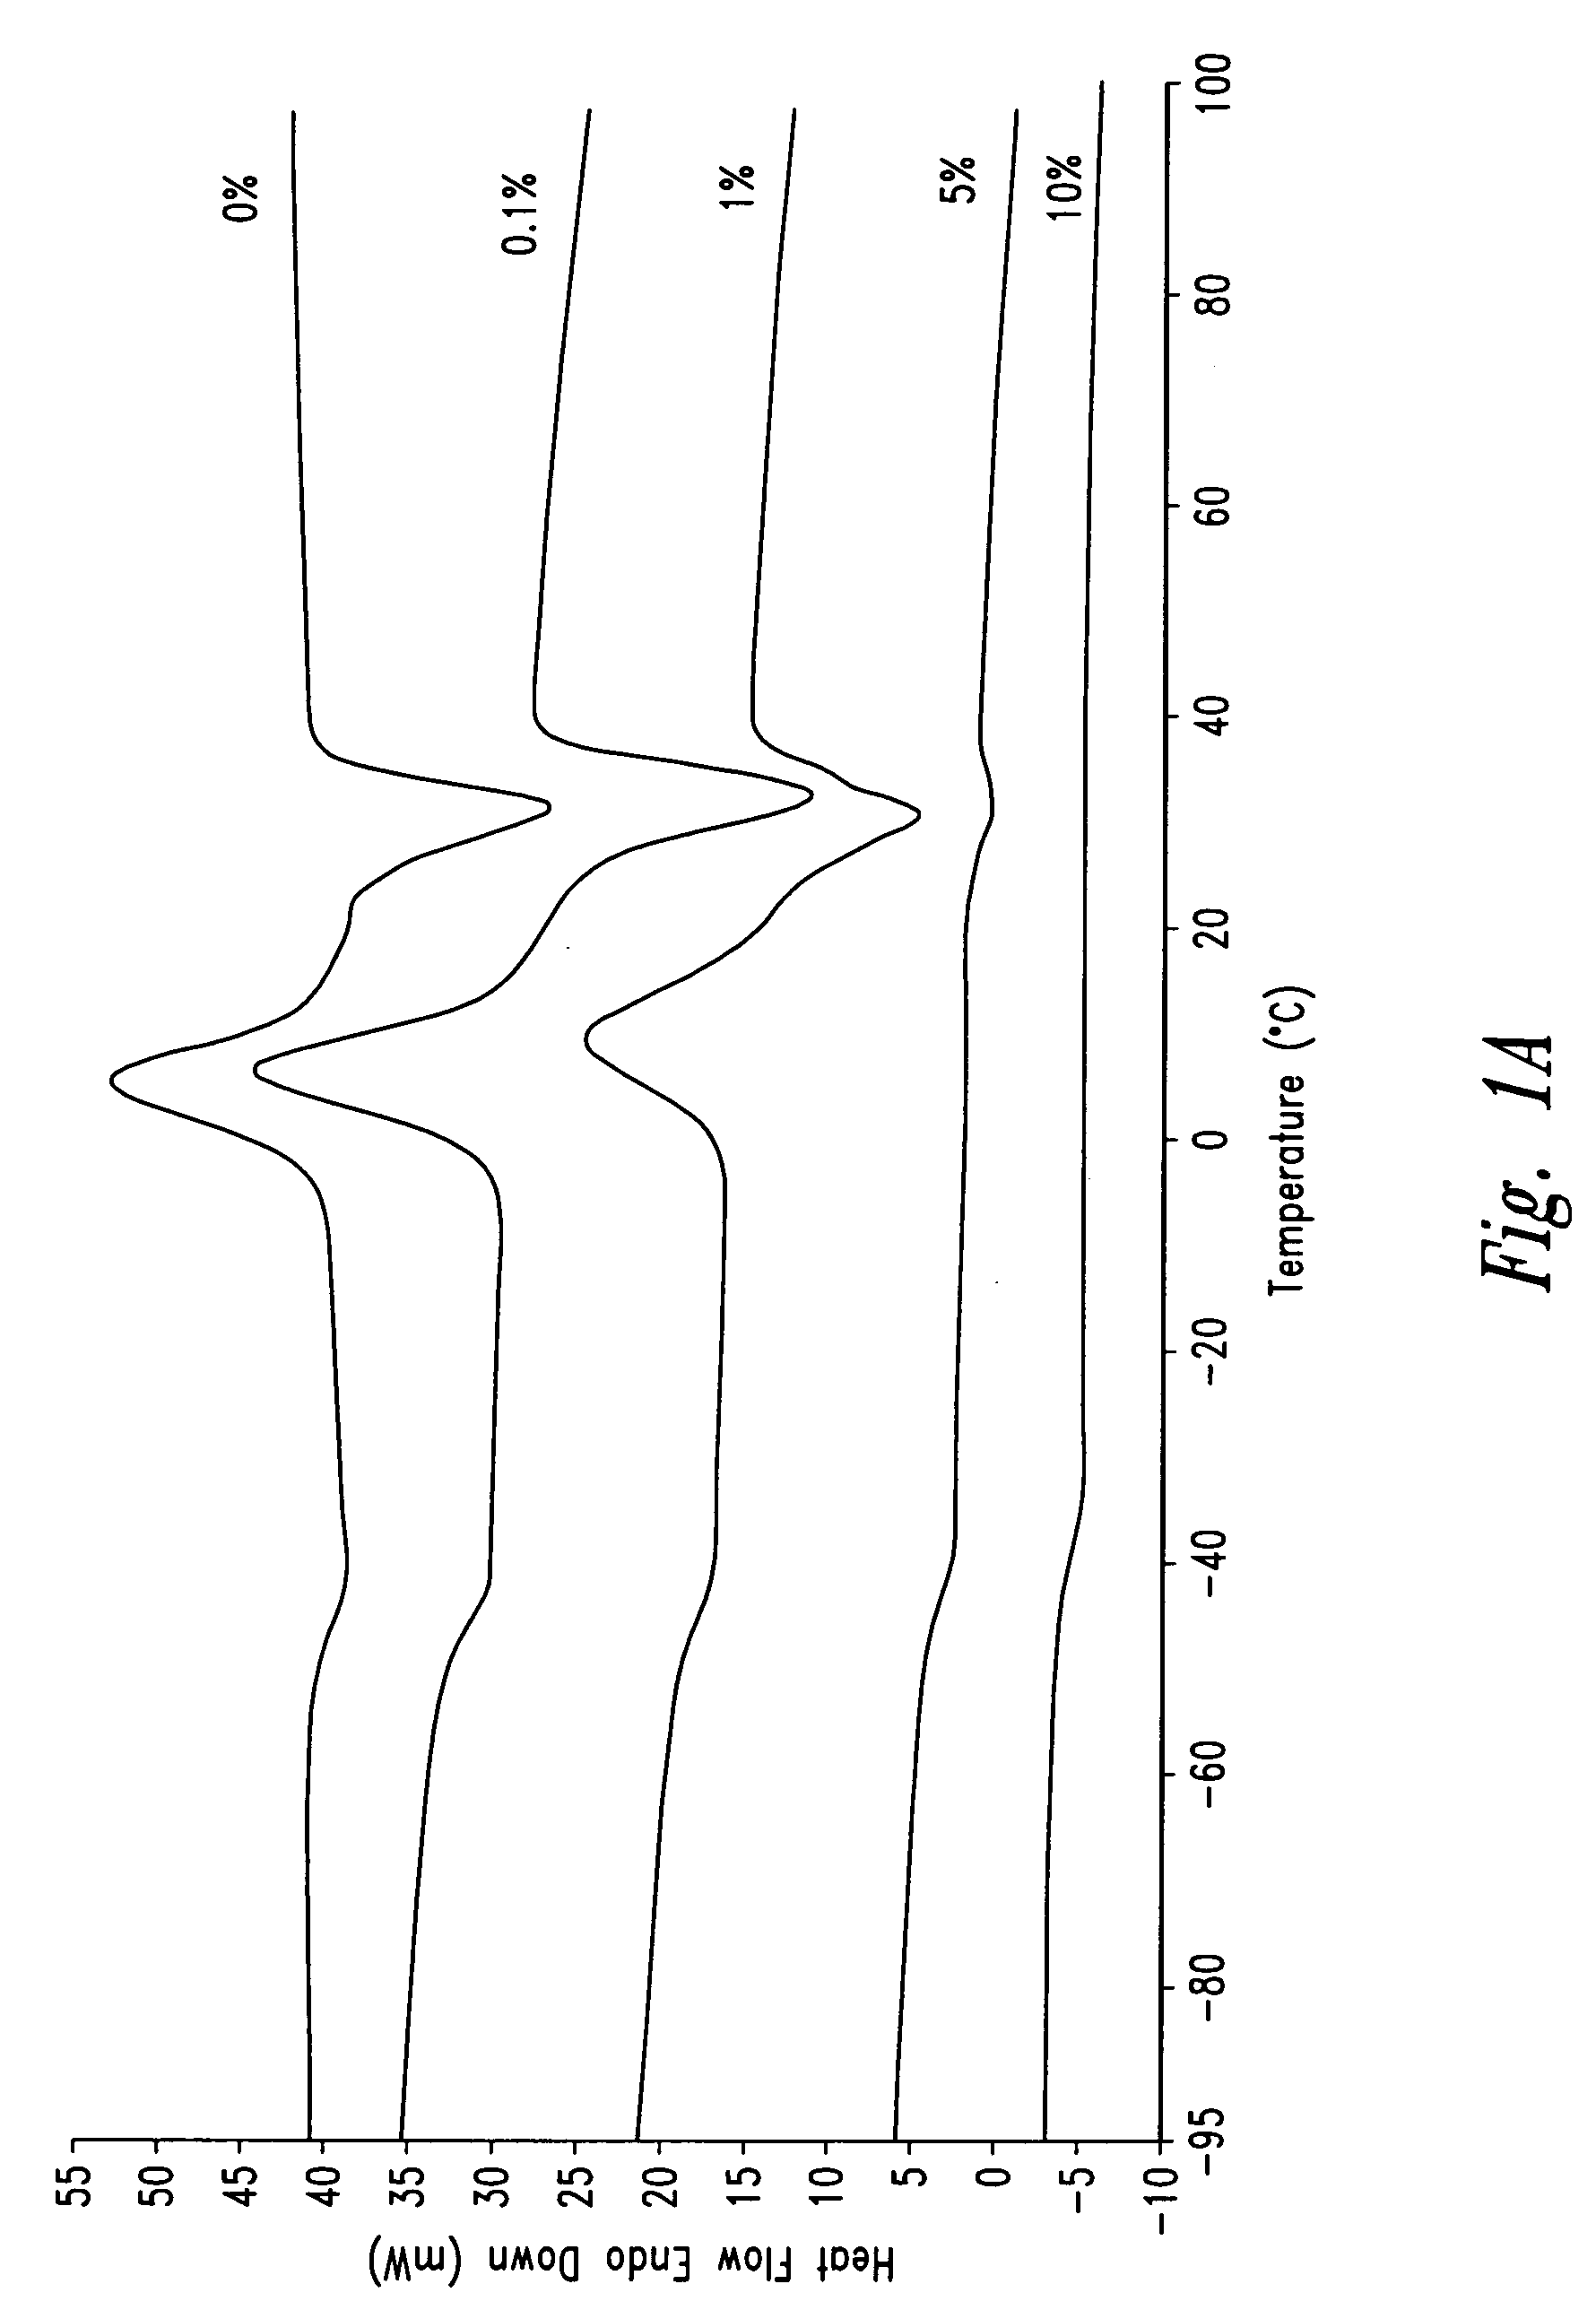 Polymeric systems for drug delivery and uses thereof